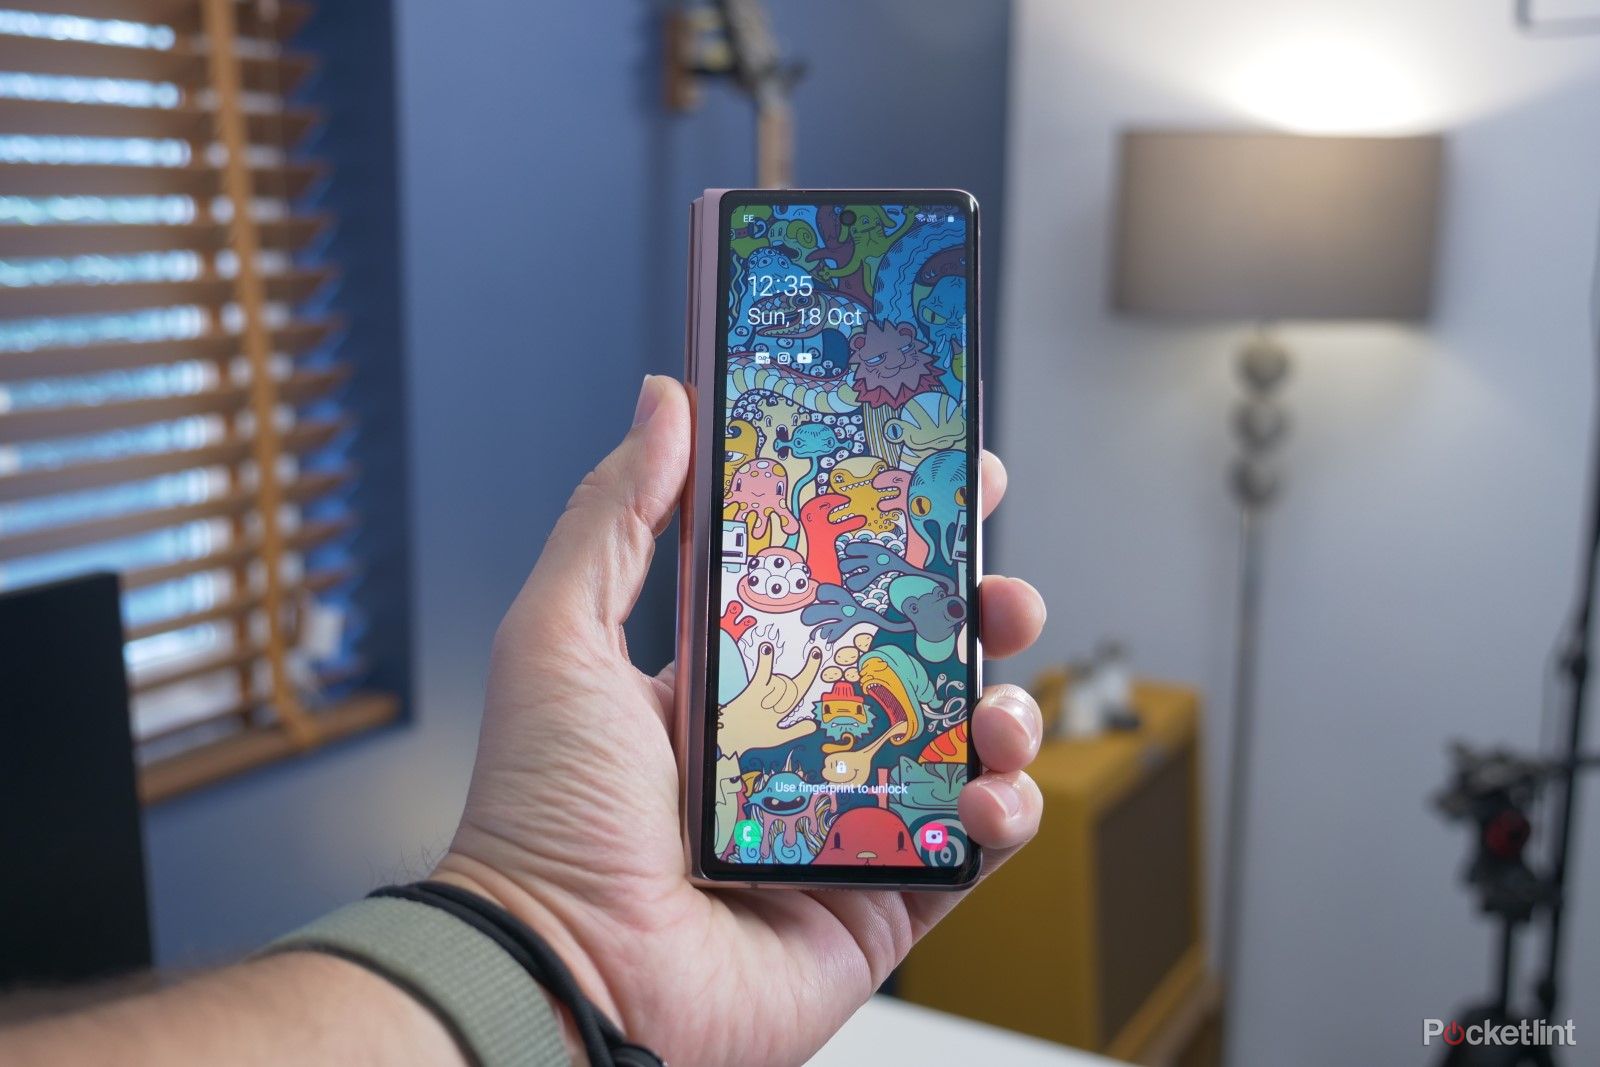 Samsung Galaxy Z Fold 3 with gesture control functions photo 1